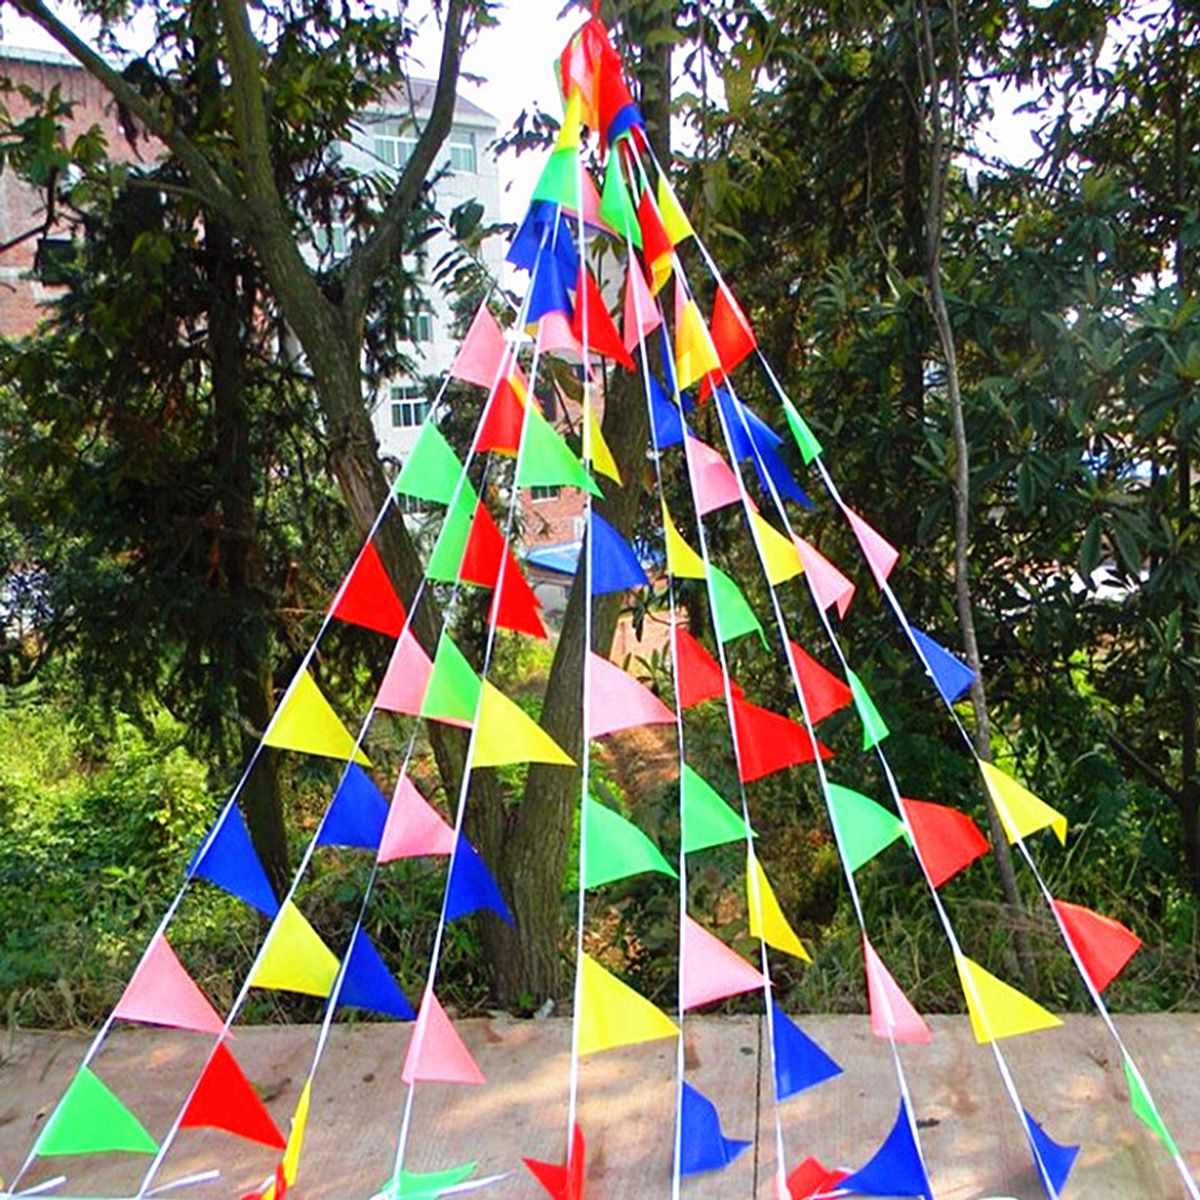 125ft-Multicolors-Triangle-Pennant-Flag-Party-Wedding-Birthday-Banner-Bunting-Decorations-1128722